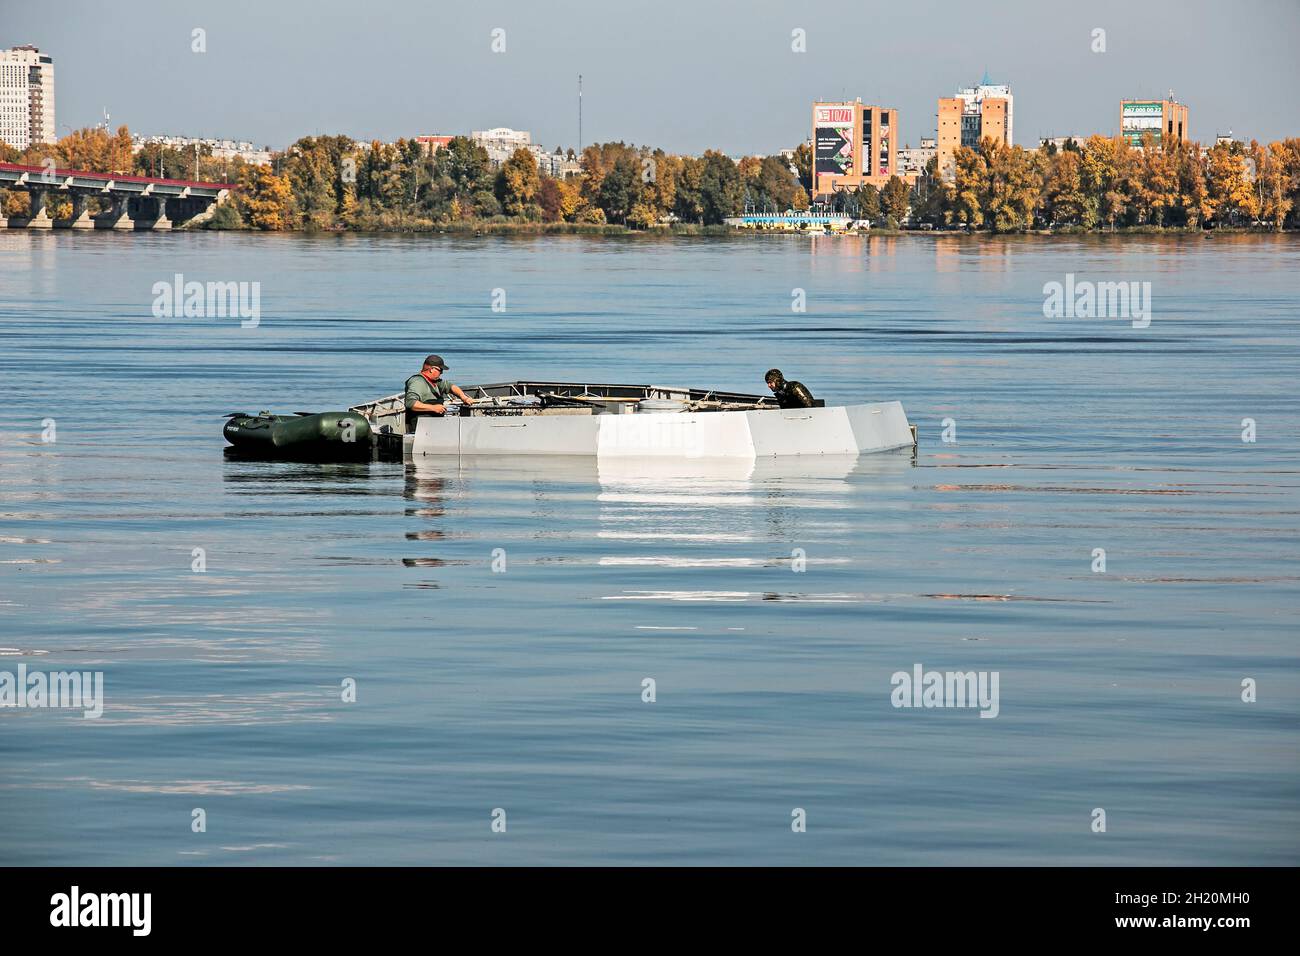 Dnepropetrovsk, Ukraine - 10.15.2021: Maintenance works of the city fountain. Municipal service workers, one in a diving suit and the other on a rubbe Stock Photo